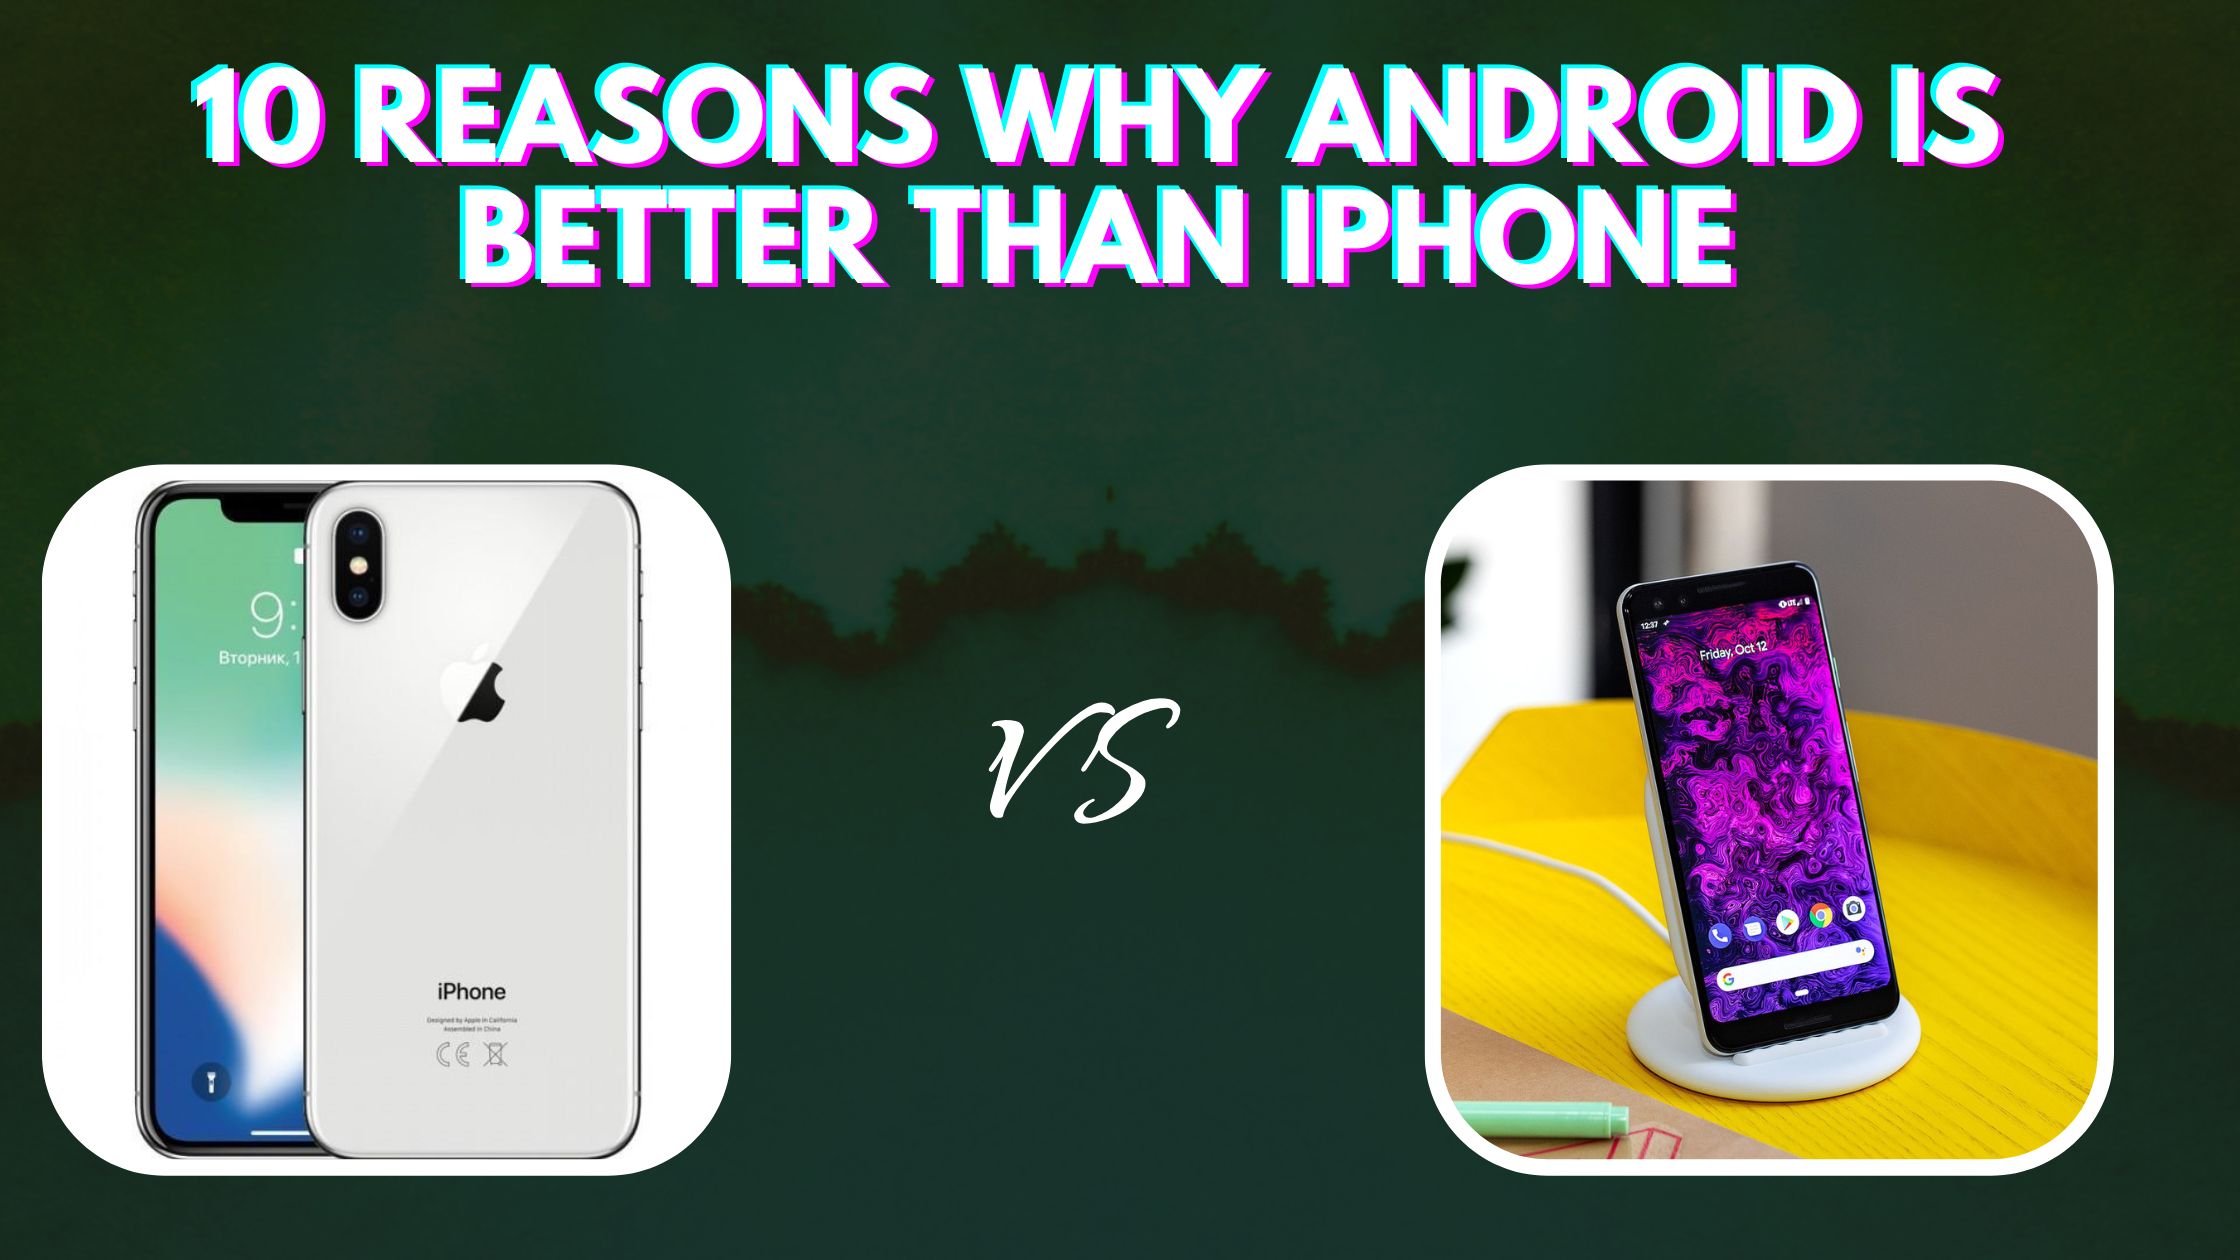 10 Reasons Android is Better Than iPhone